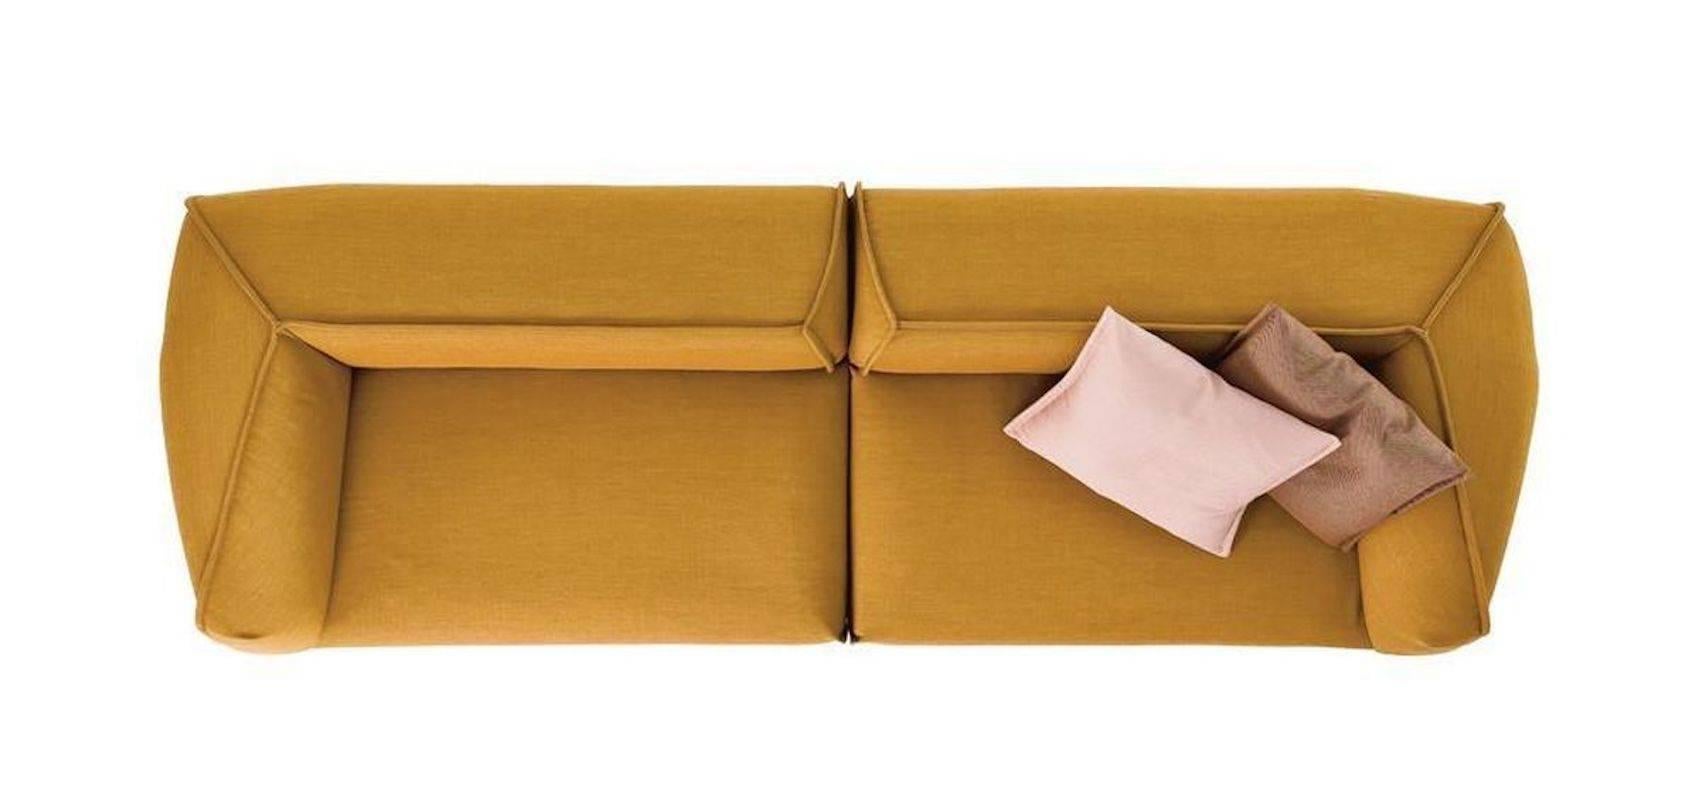 M.A.S.S.A.S Modular Sofa by Patricia Urquiola for Moroso in Fabric For Sale 2